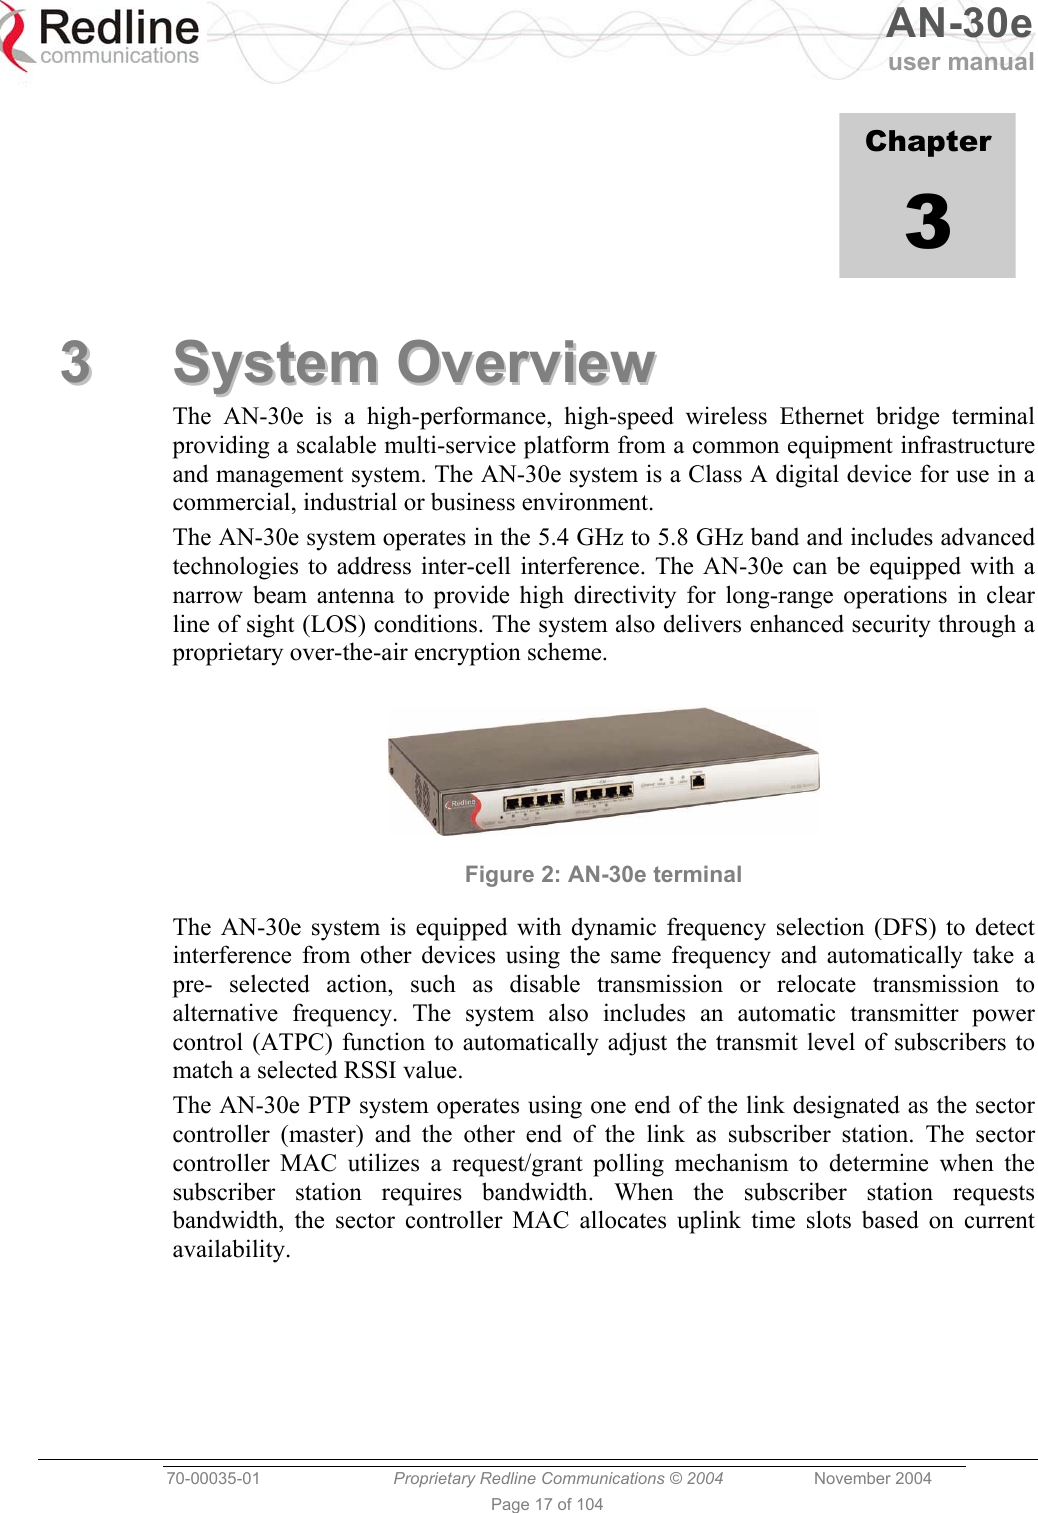   AN-30e user manual  70-00035-01  Proprietary Redline Communications © 2004 November 2004   Page 17 of 104             Chapter 3 33  SSyysstteemm  OOvveerrvviieeww  The AN-30e is a high-performance, high-speed wireless Ethernet bridge terminal providing a scalable multi-service platform from a common equipment infrastructure and management system. The AN-30e system is a Class A digital device for use in a commercial, industrial or business environment. The AN-30e system operates in the 5.4 GHz to 5.8 GHz band and includes advanced technologies to address inter-cell interference. The AN-30e can be equipped with a narrow beam antenna to provide high directivity for long-range operations in clear line of sight (LOS) conditions. The system also delivers enhanced security through a proprietary over-the-air encryption scheme.   Figure 2: AN-30e terminal The AN-30e system is equipped with dynamic frequency selection (DFS) to detect interference from other devices using the same frequency and automatically take a pre- selected action, such as disable transmission or relocate transmission to alternative frequency. The system also includes an automatic transmitter power control (ATPC) function to automatically adjust the transmit level of subscribers to match a selected RSSI value. The AN-30e PTP system operates using one end of the link designated as the sector controller (master) and the other end of the link as subscriber station. The sector controller MAC utilizes a request/grant polling mechanism to determine when the subscriber station requires bandwidth. When the subscriber station requests bandwidth, the sector controller MAC allocates uplink time slots based on current availability.  